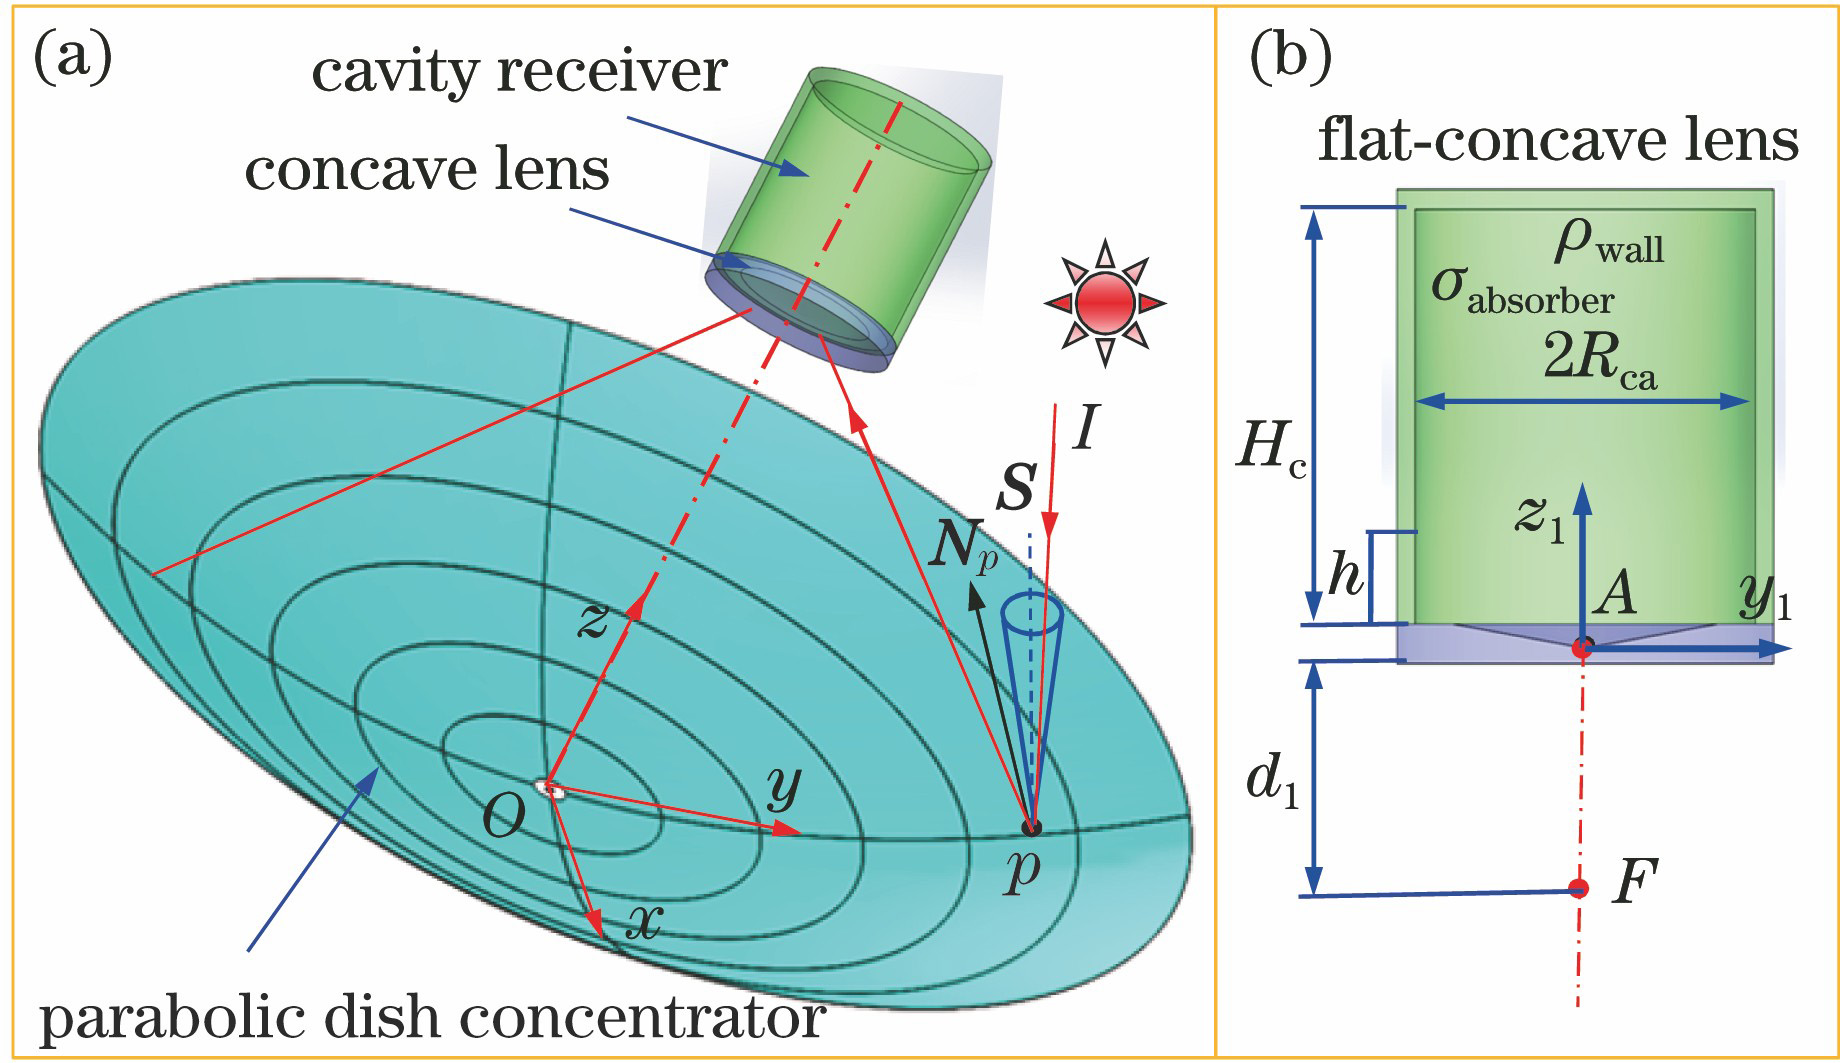 Solar dish receiver with concave lens. (a) Light transmission and geometric parameters; (b) cylindrical cavity receiver with flat-concave lens